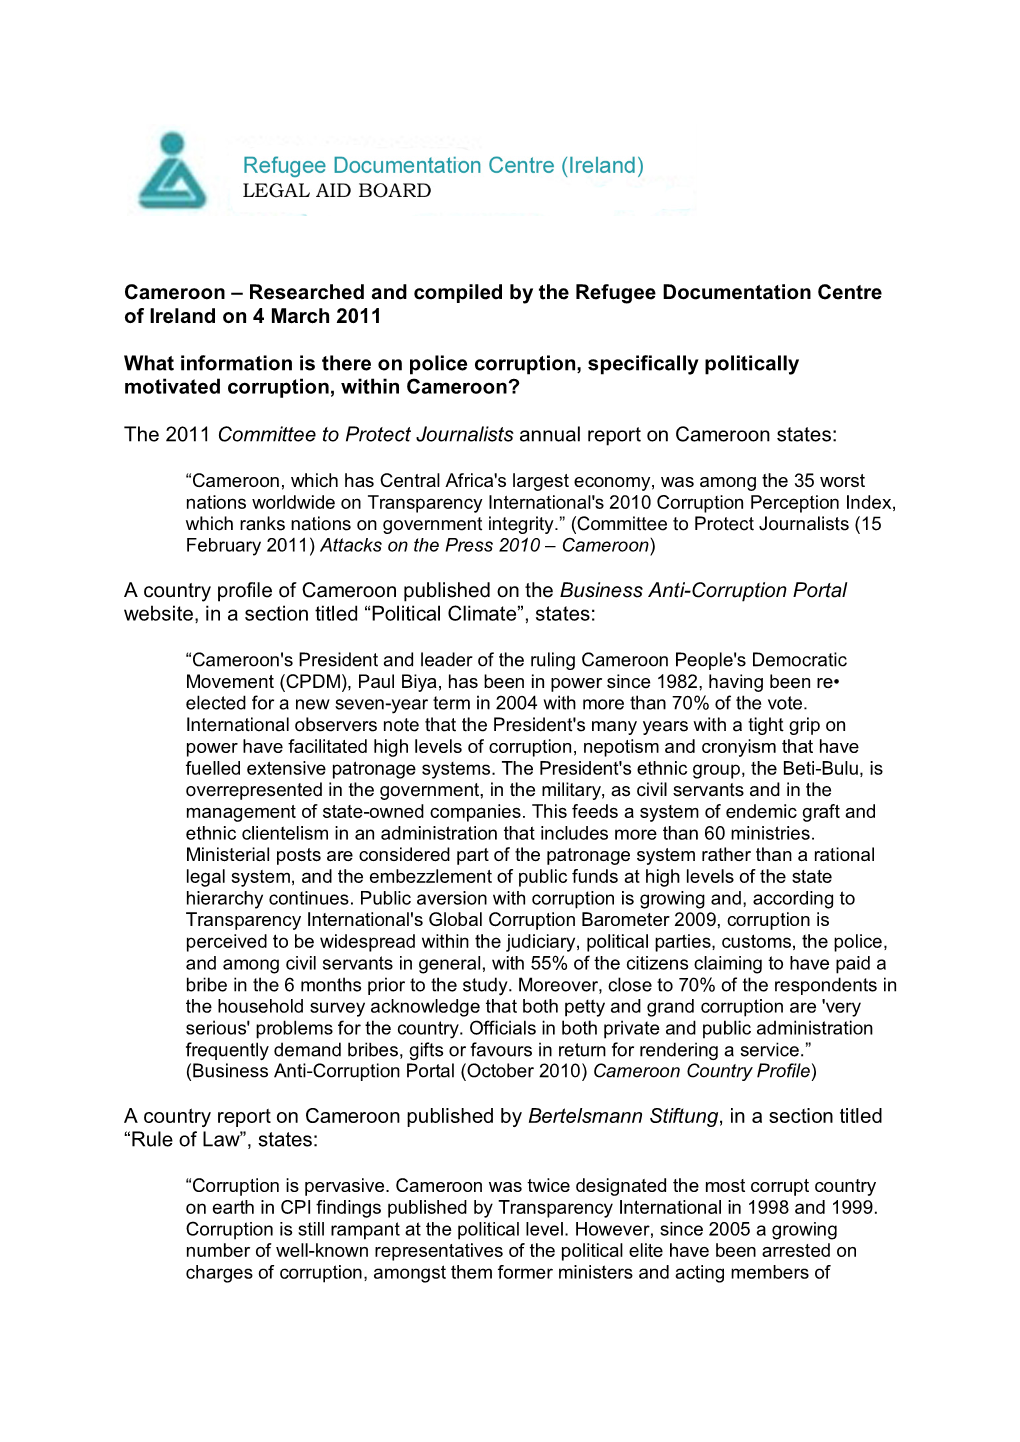 Cameroon – Researched and Compiled by the Refugee Documentation Centre of Ireland on 4 March 2011